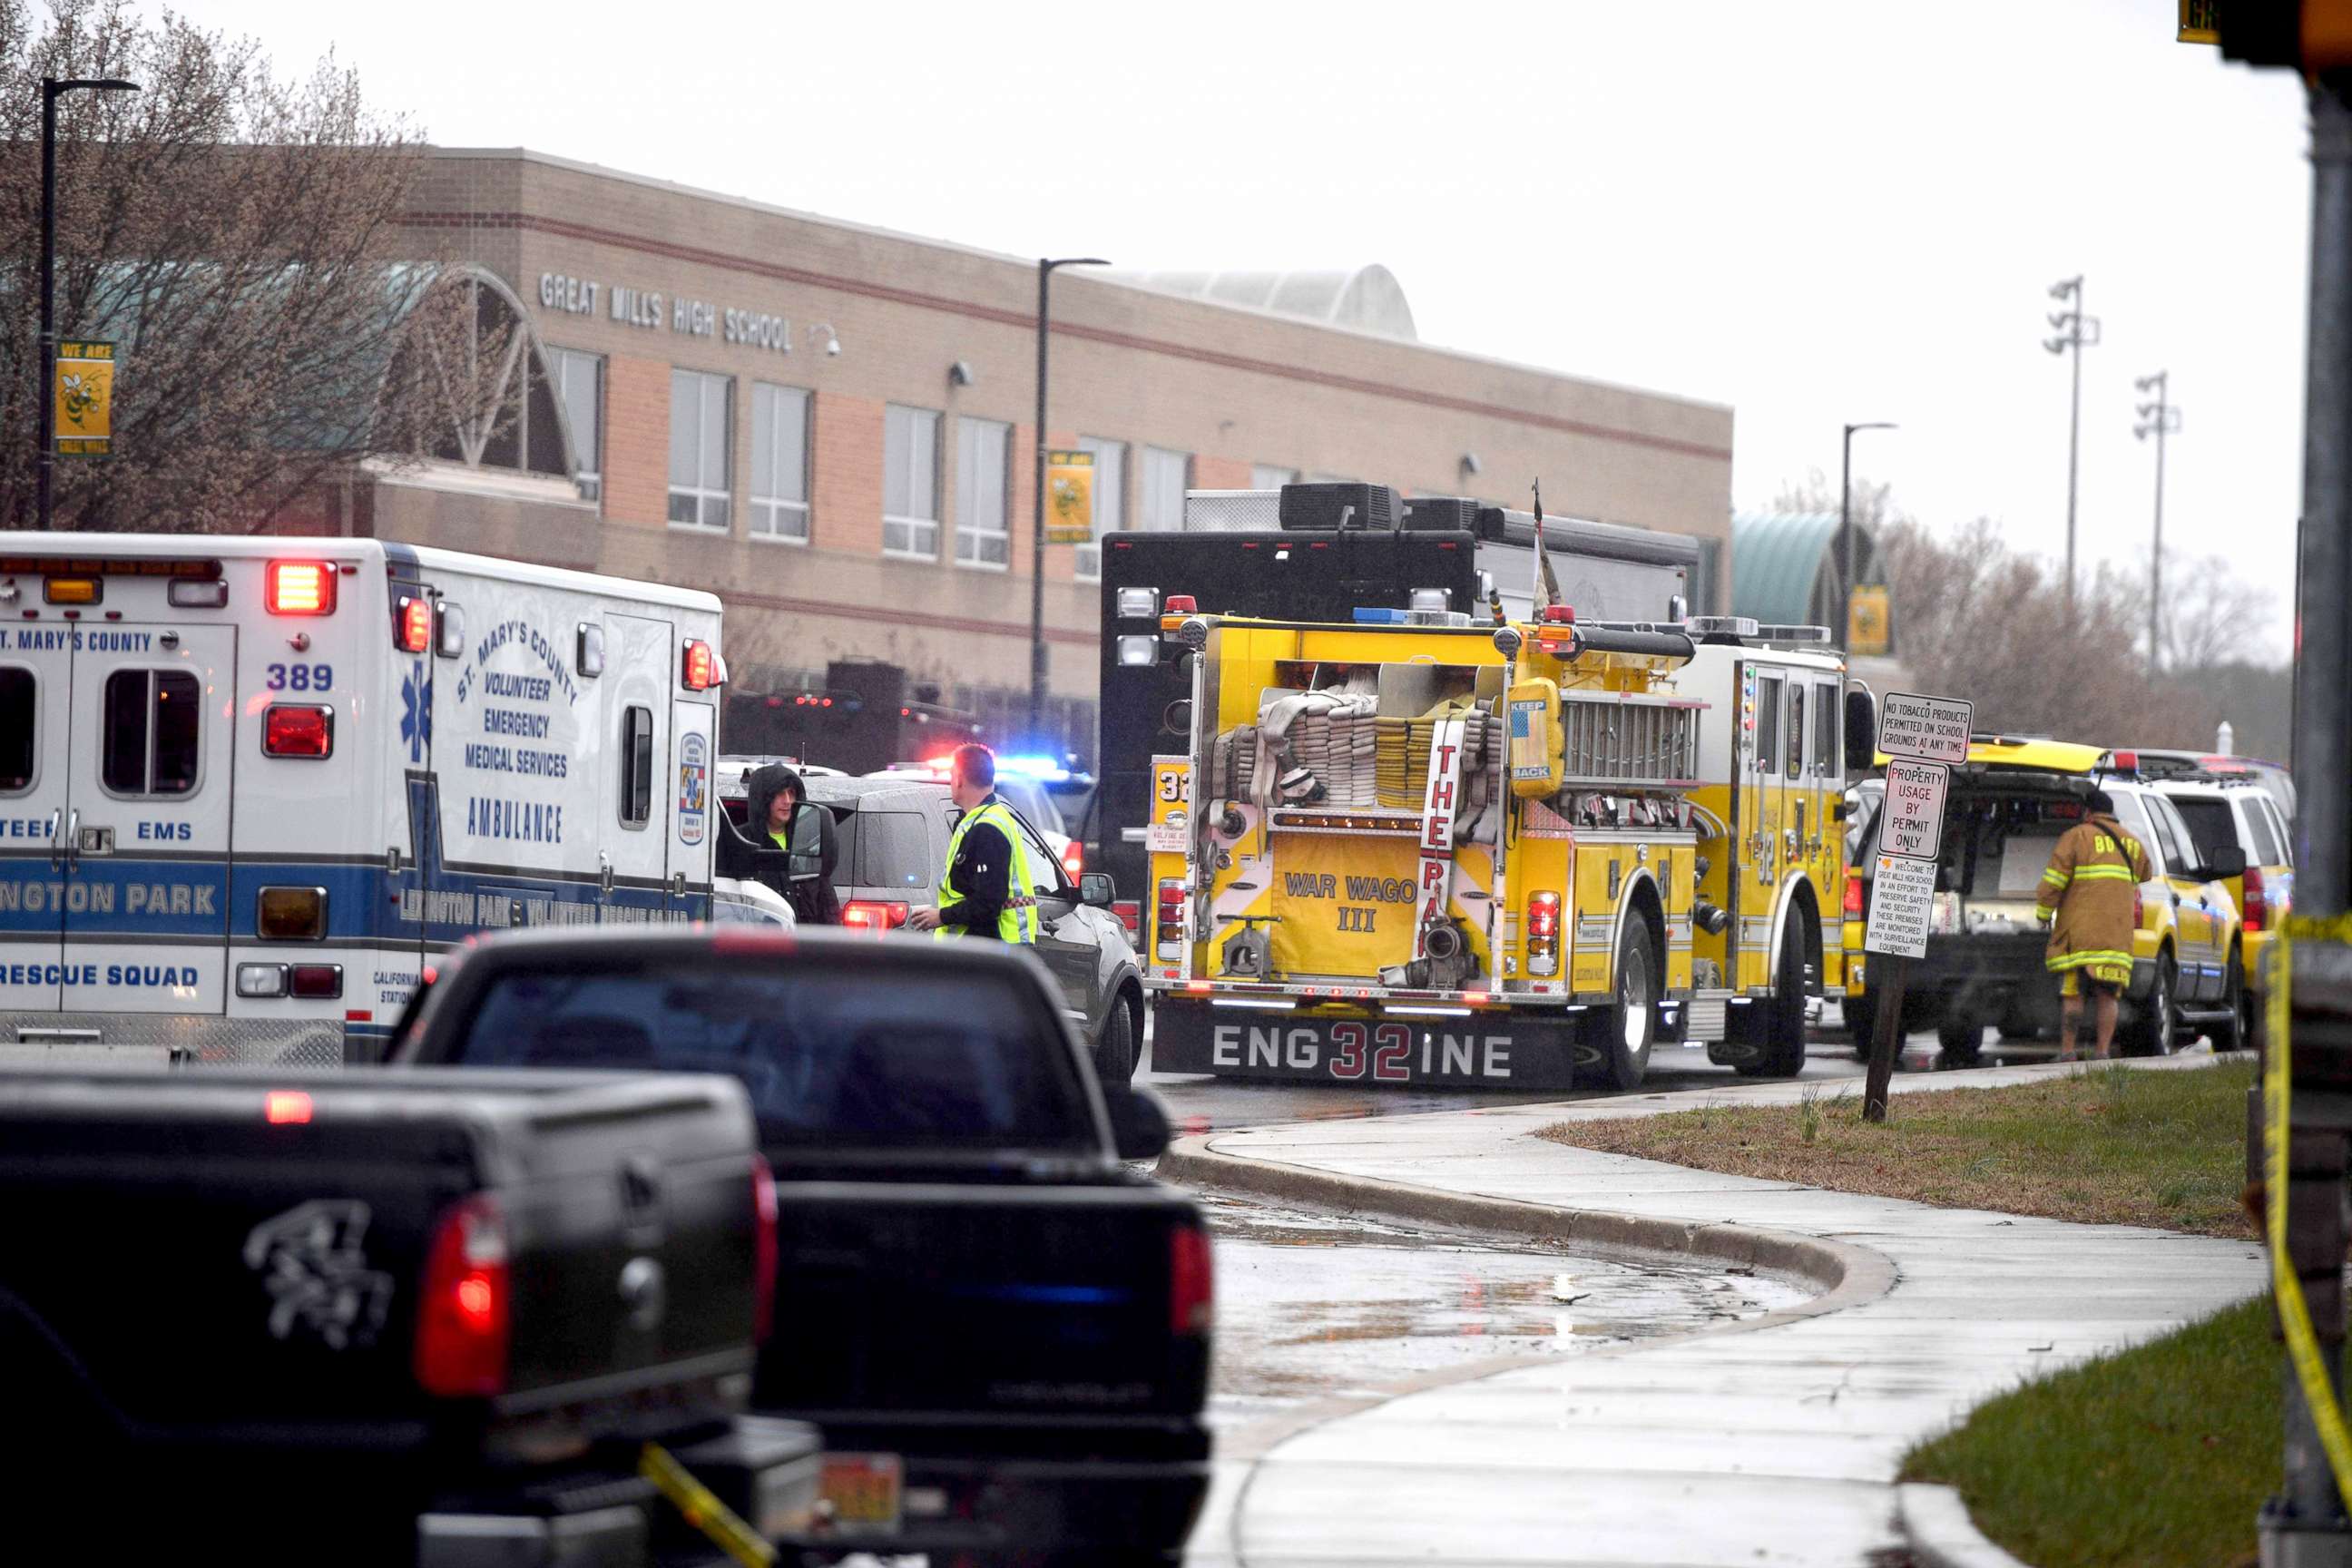 PHOTO: Emergency crews are seen on March 20, 2018 at Great Mills High School in Lexington Park, Maryland after a shooting at the school.